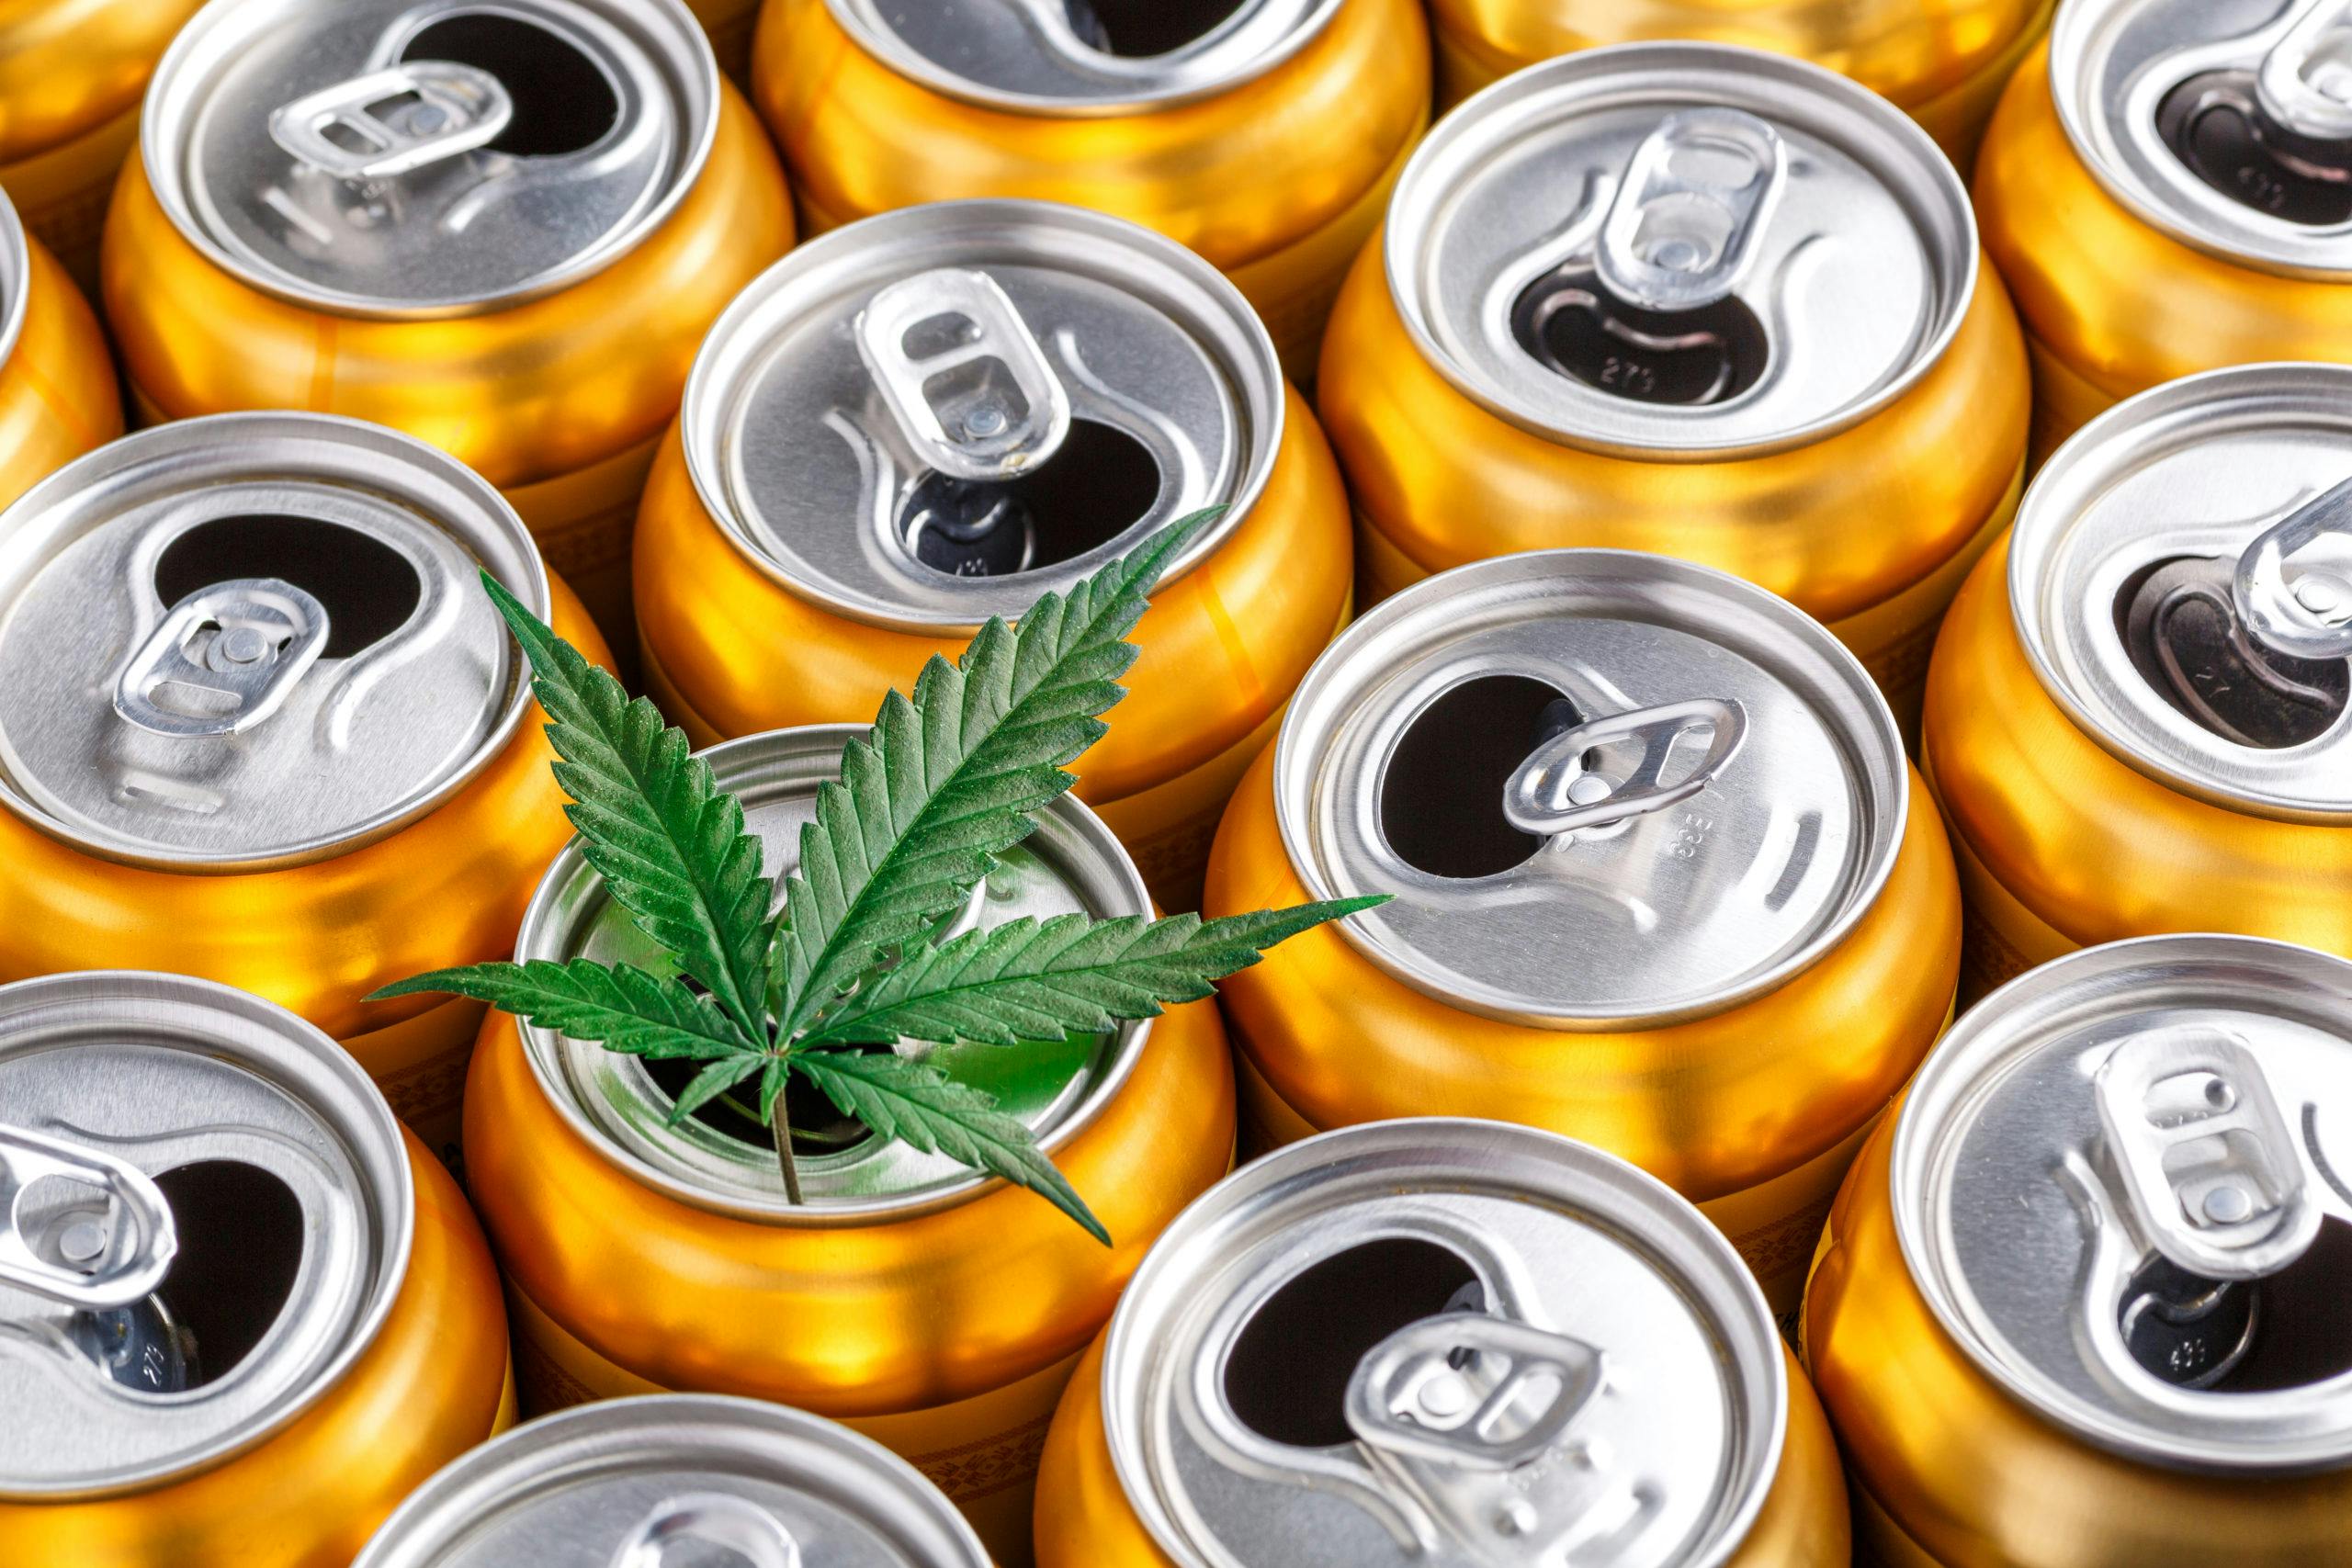 Health Canada Introduce Proposal to Increase Limits for Cannabis Beverages